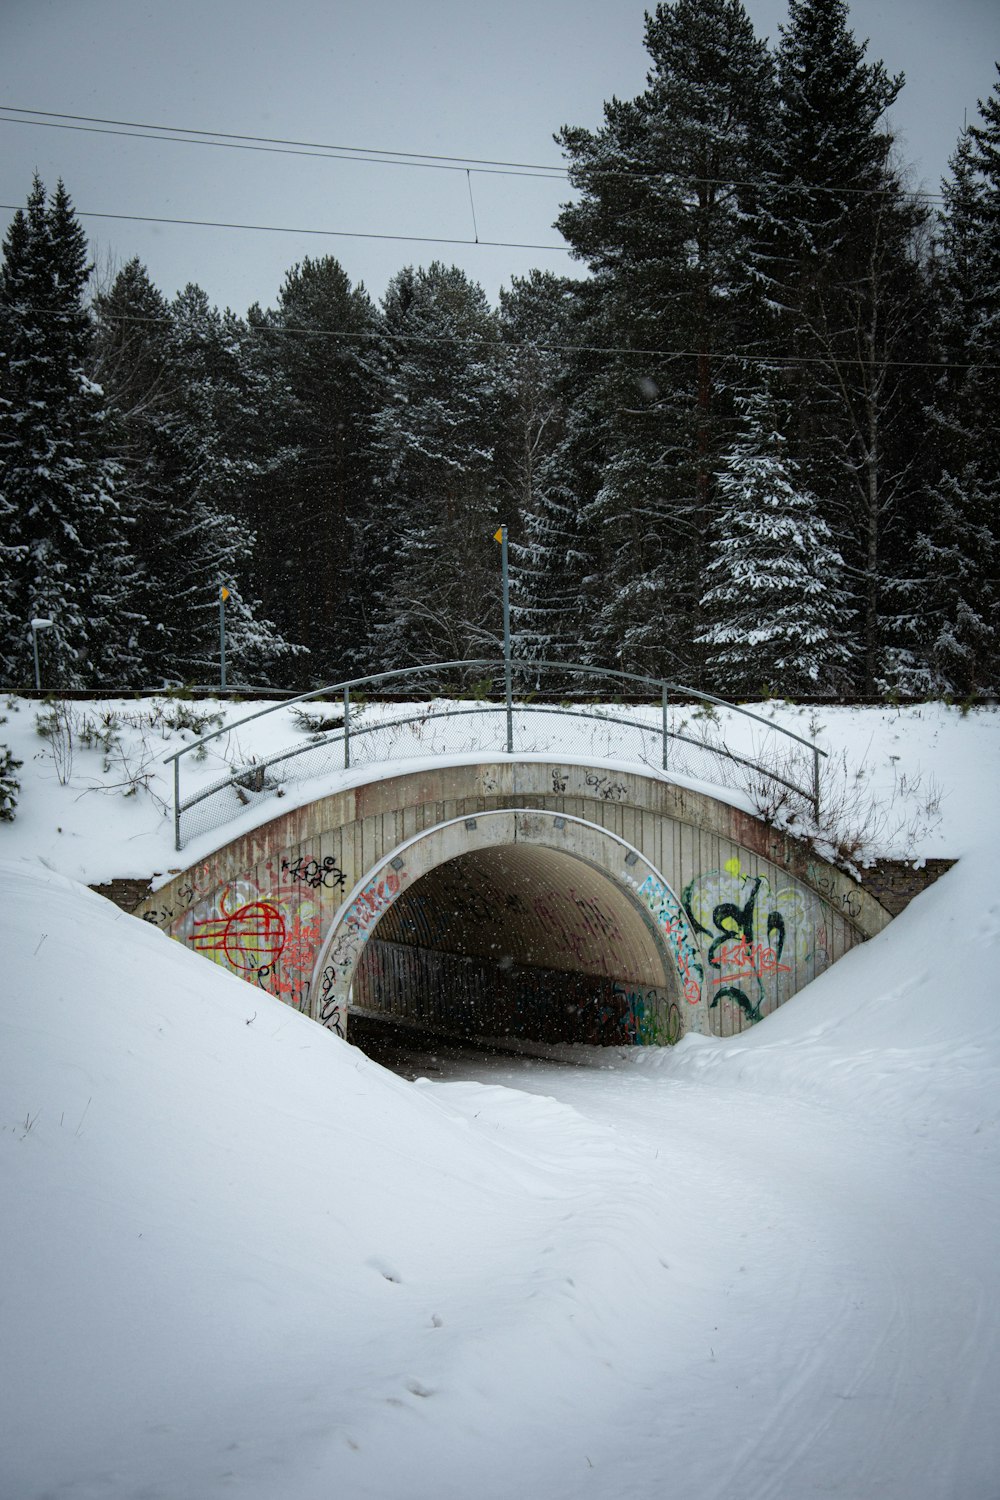 a snow covered bridge with graffiti on it